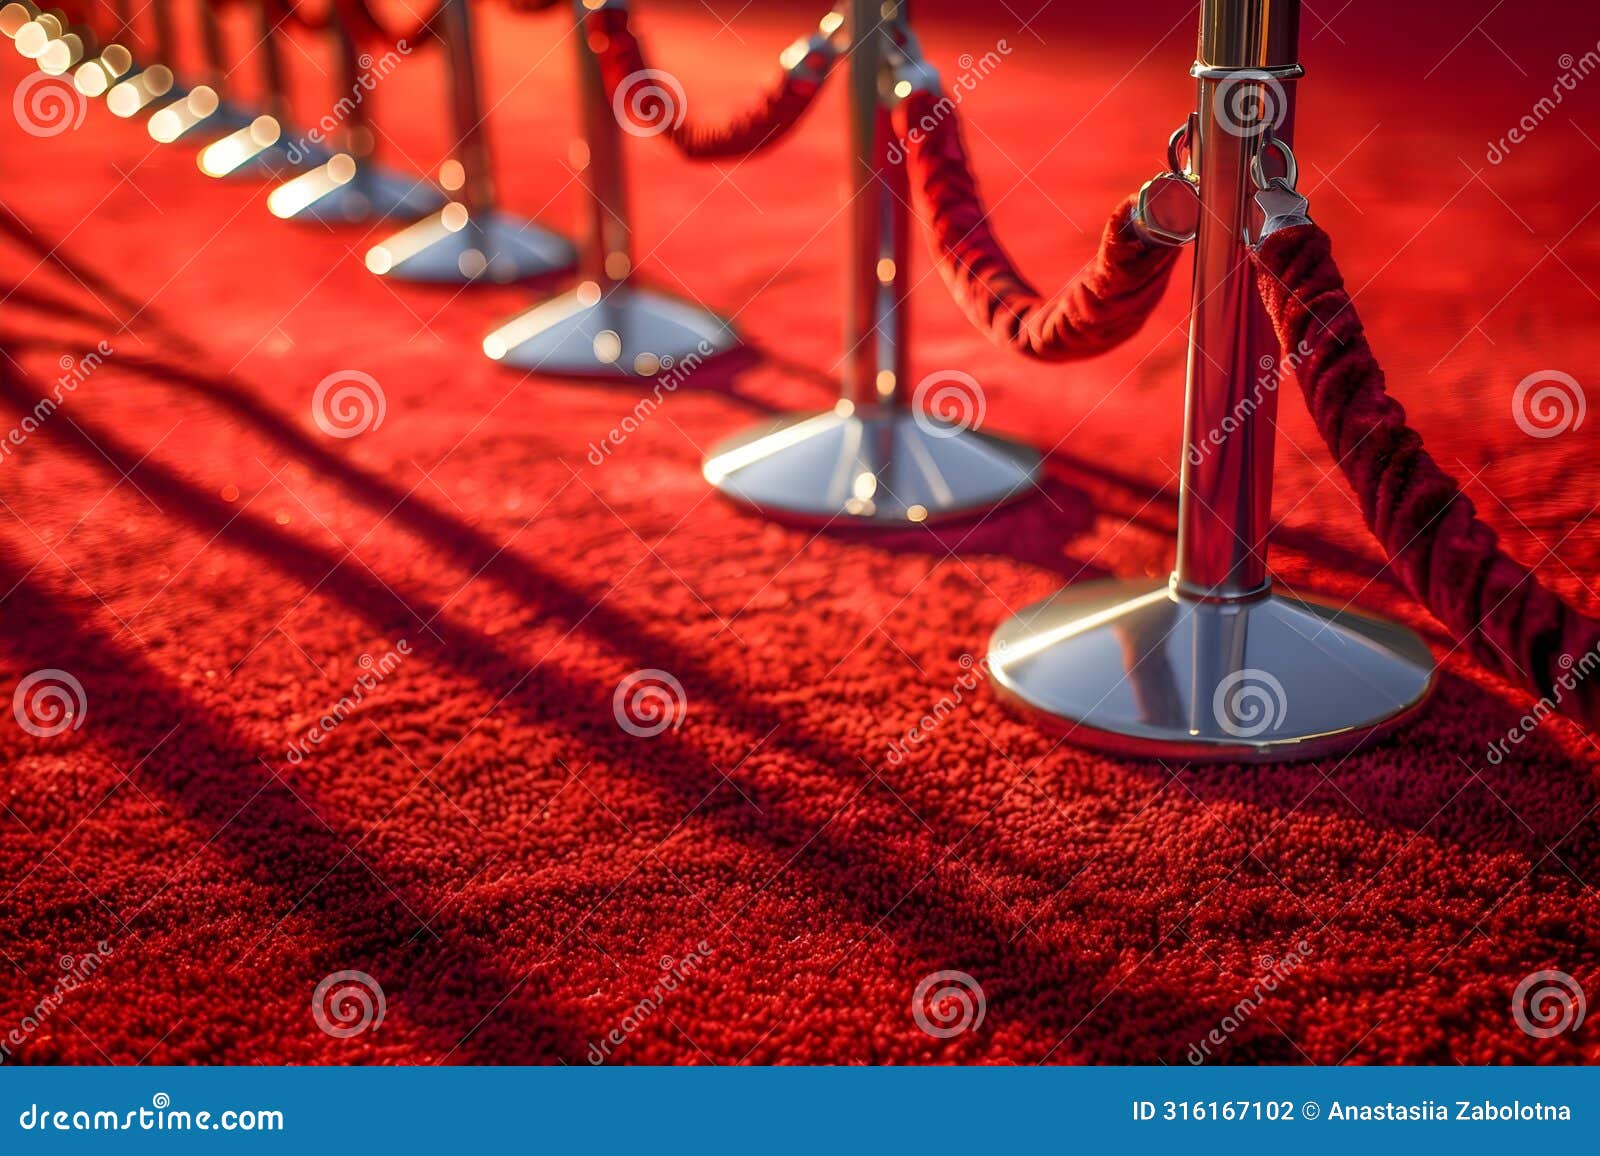 concept red carpet, velvet rope, red carpet and velvet rope for vip events and glamorous occasions